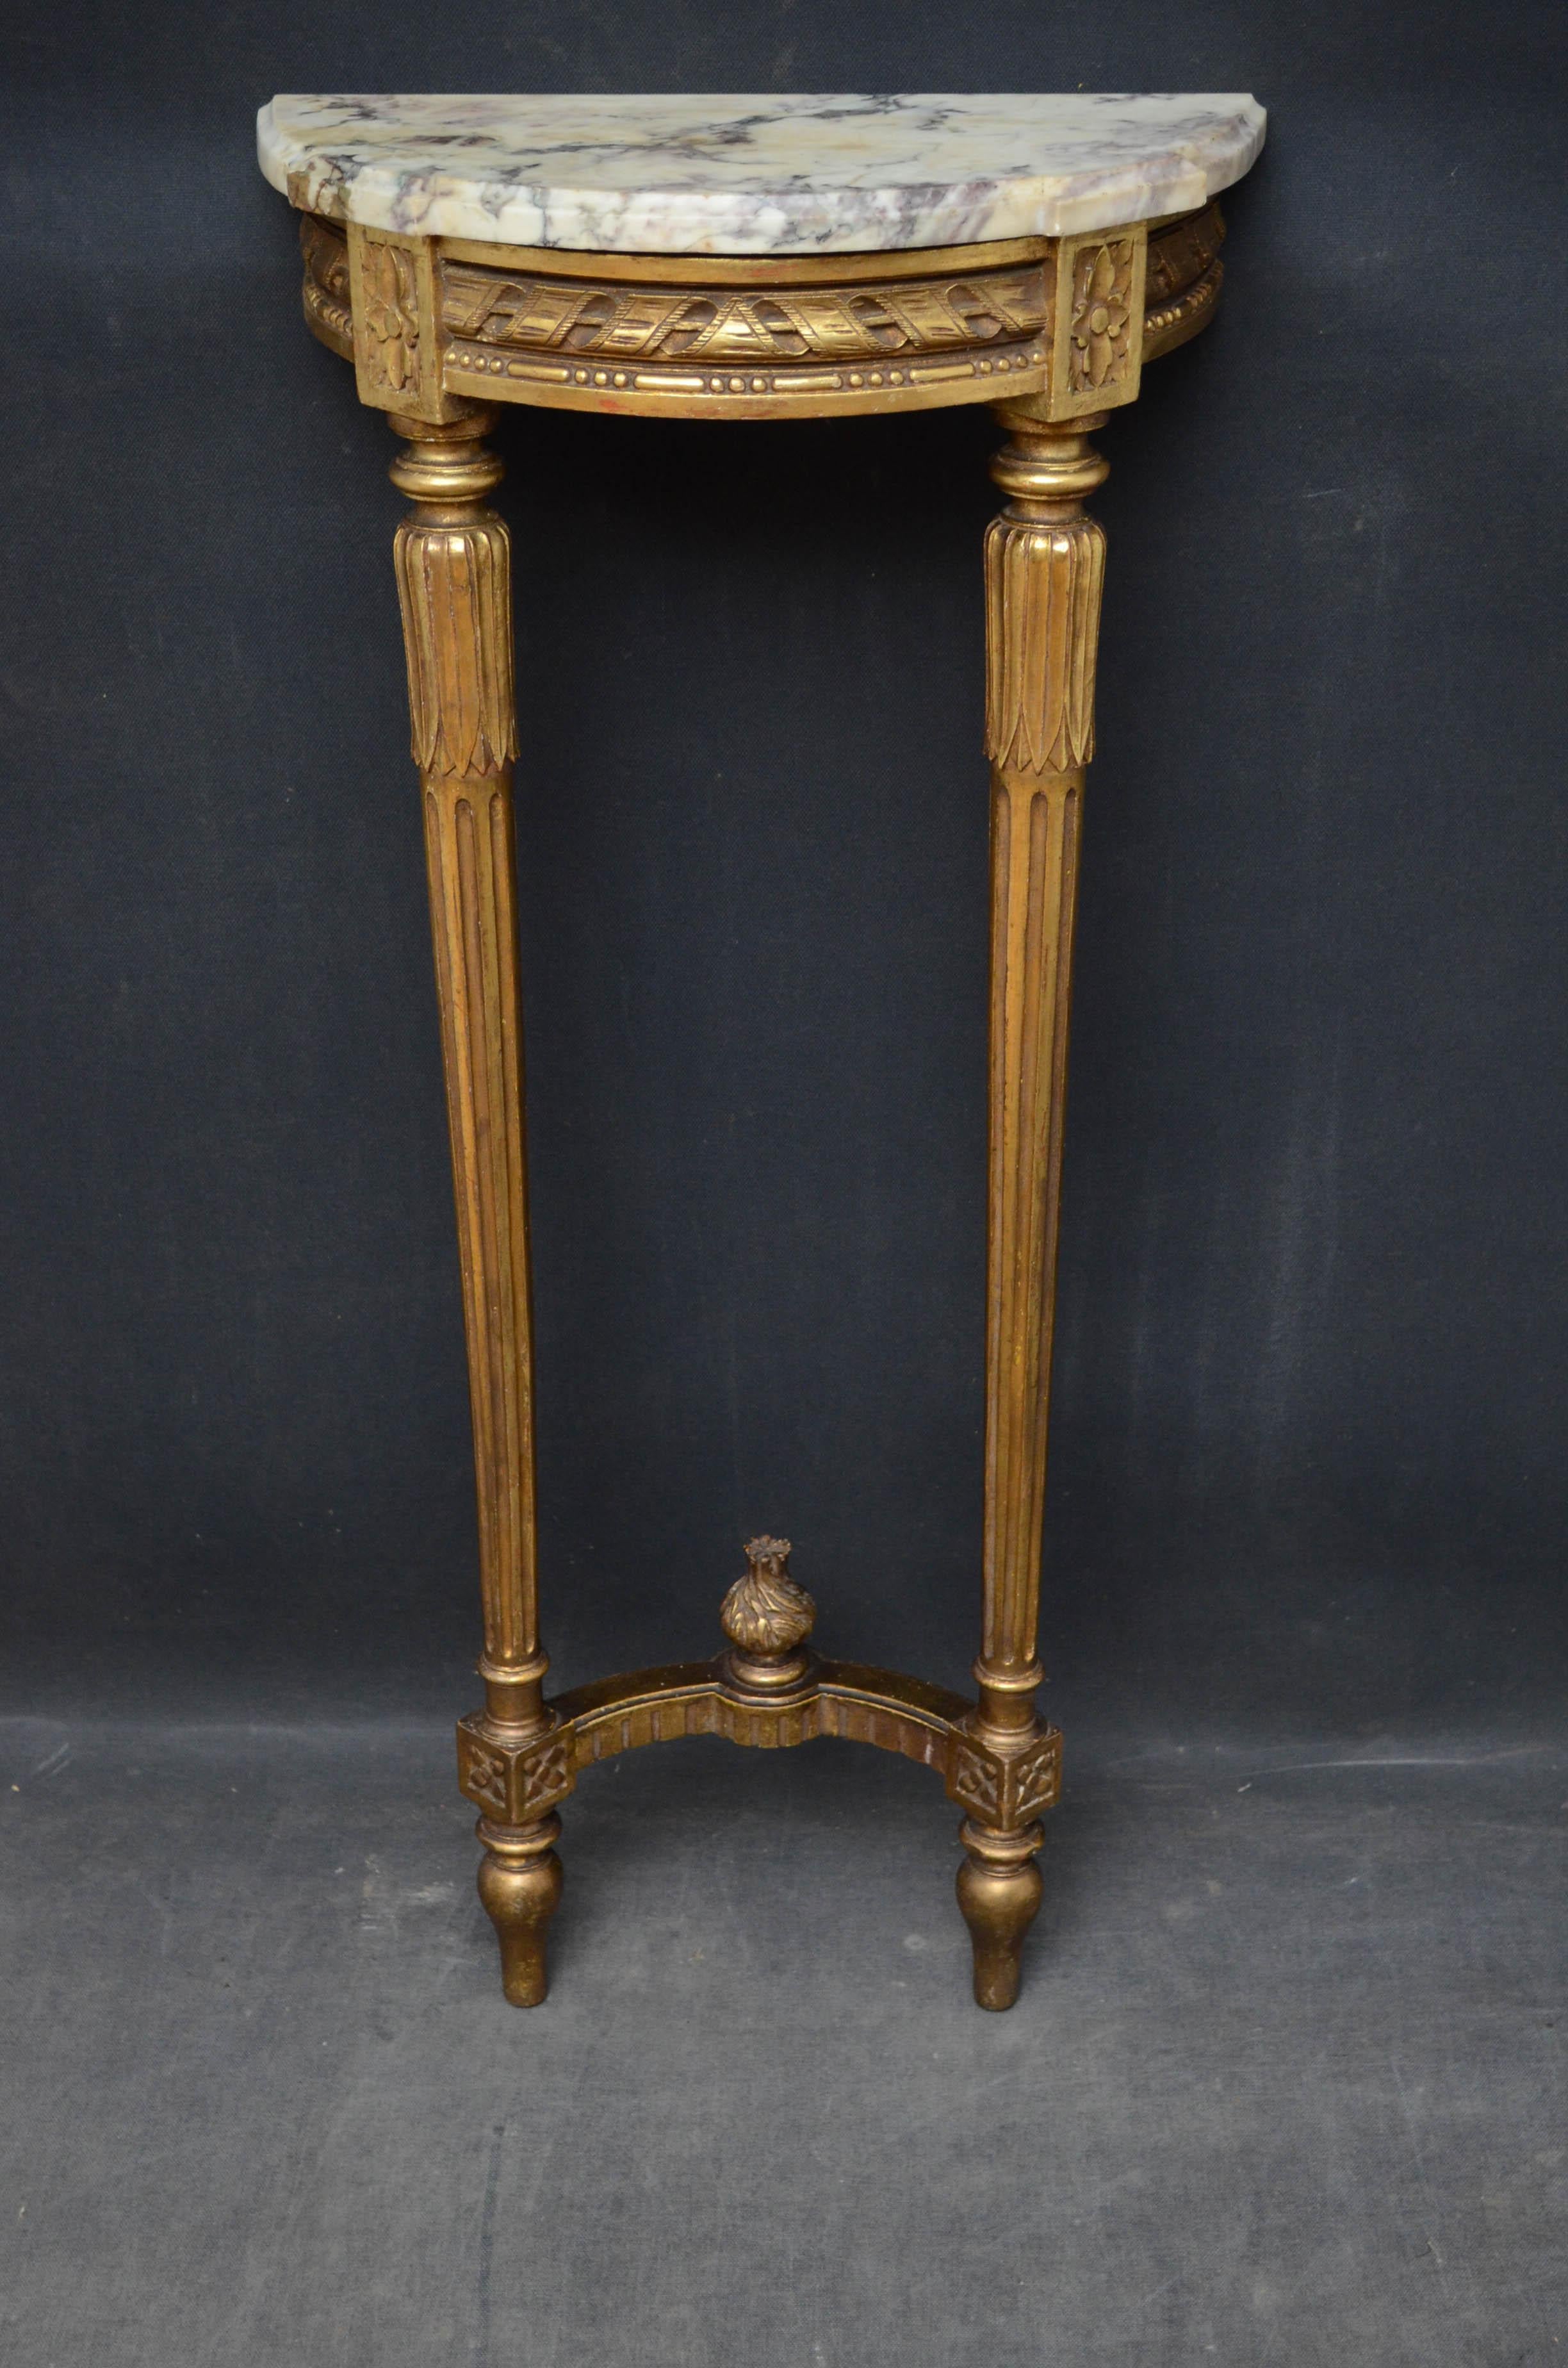 Sn4551 French gilded half moon hall table, having original veined marble top above carved frieze, standing on slender carved and reeded legs united by a stretcher. Retains original gilt, circa 1900
Measures: H 35